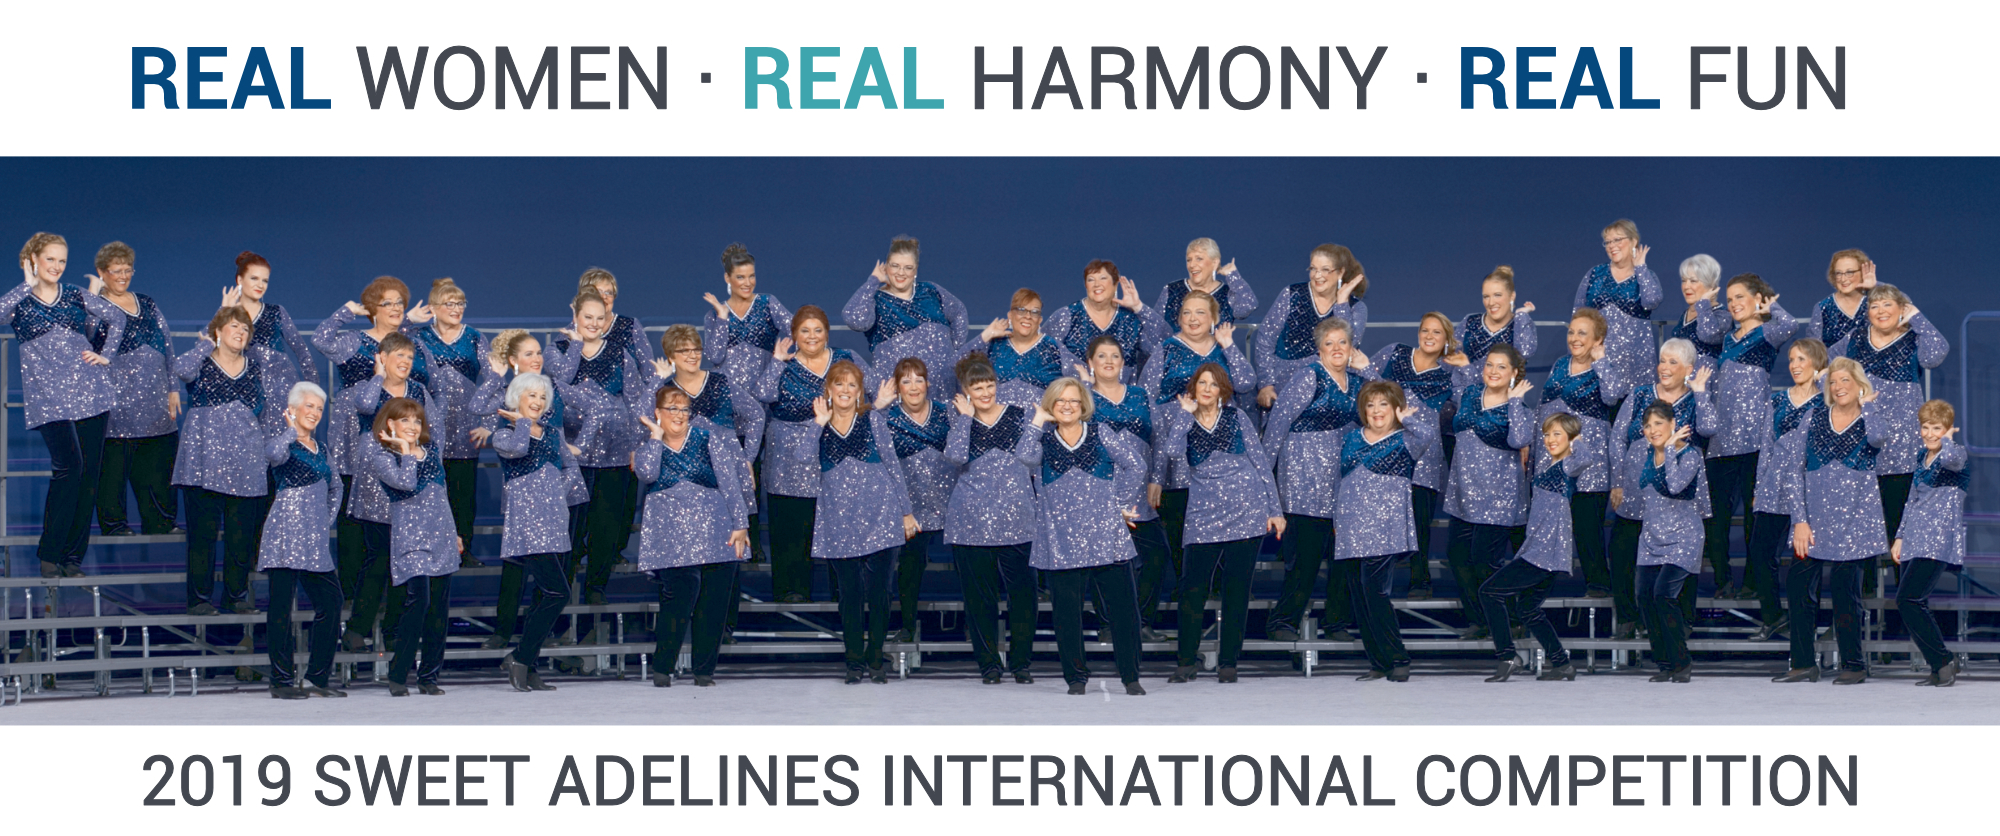 Real Women - Real Harmony - Real Fun; Shoreline Sound posing on stage at the 2019 Sweet Adelines International Competition in New Orleans, LA